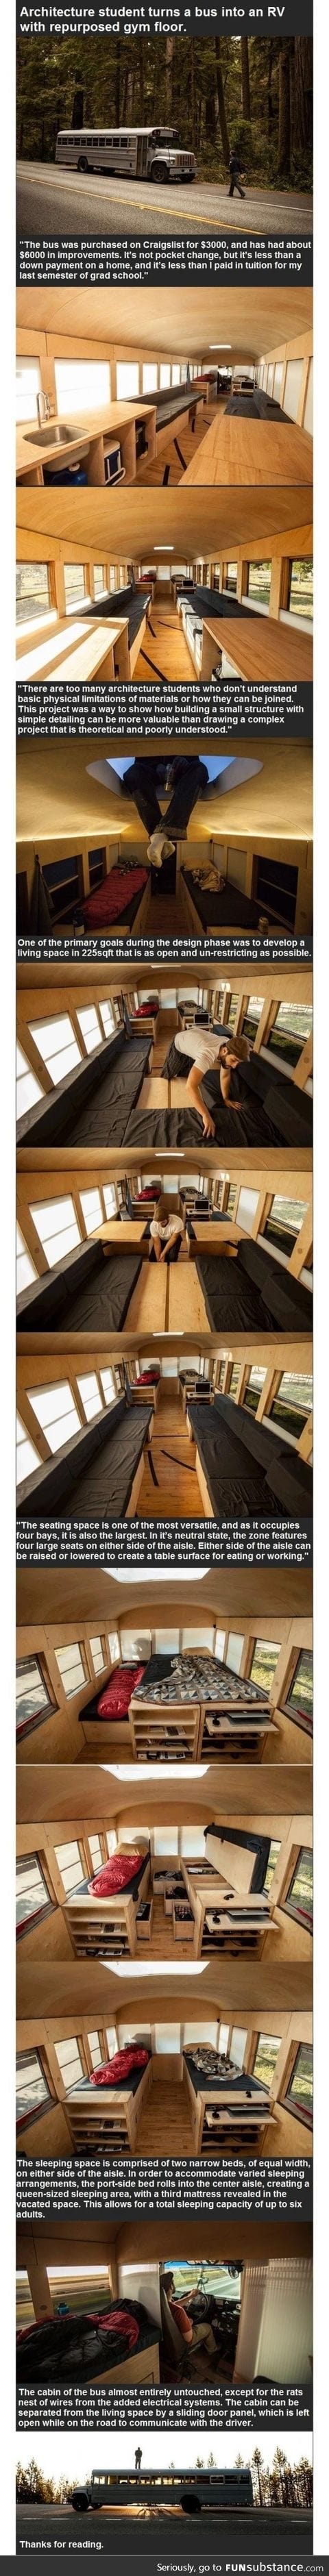 Bus converted into an RV